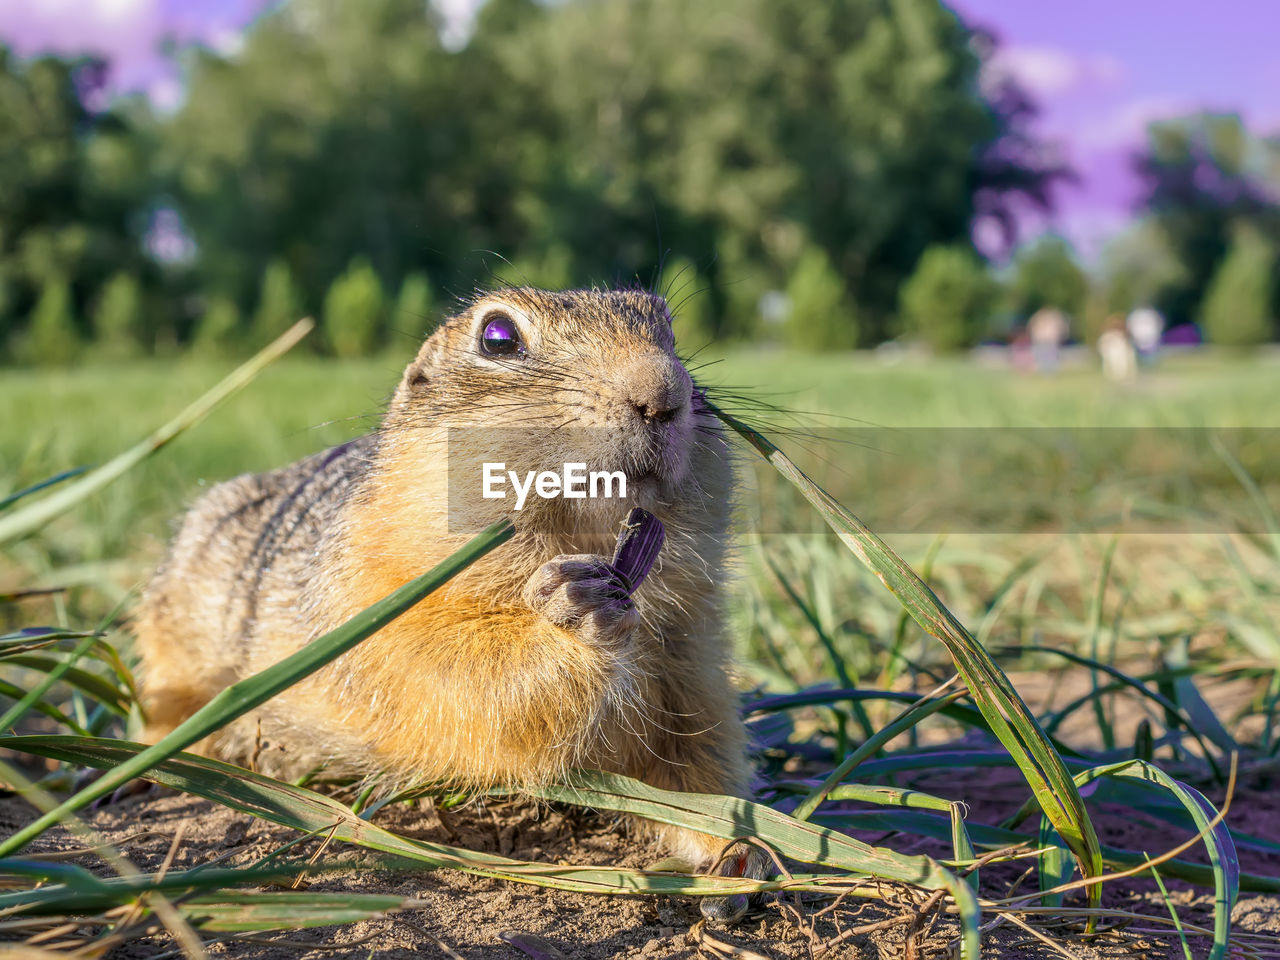 animal, animal themes, nature, mammal, one animal, animal wildlife, grass, wildlife, rodent, squirrel, prairie dog, plant, whiskers, no people, pet, close-up, focus on foreground, outdoors, eating, cute, portrait, day, animal body part